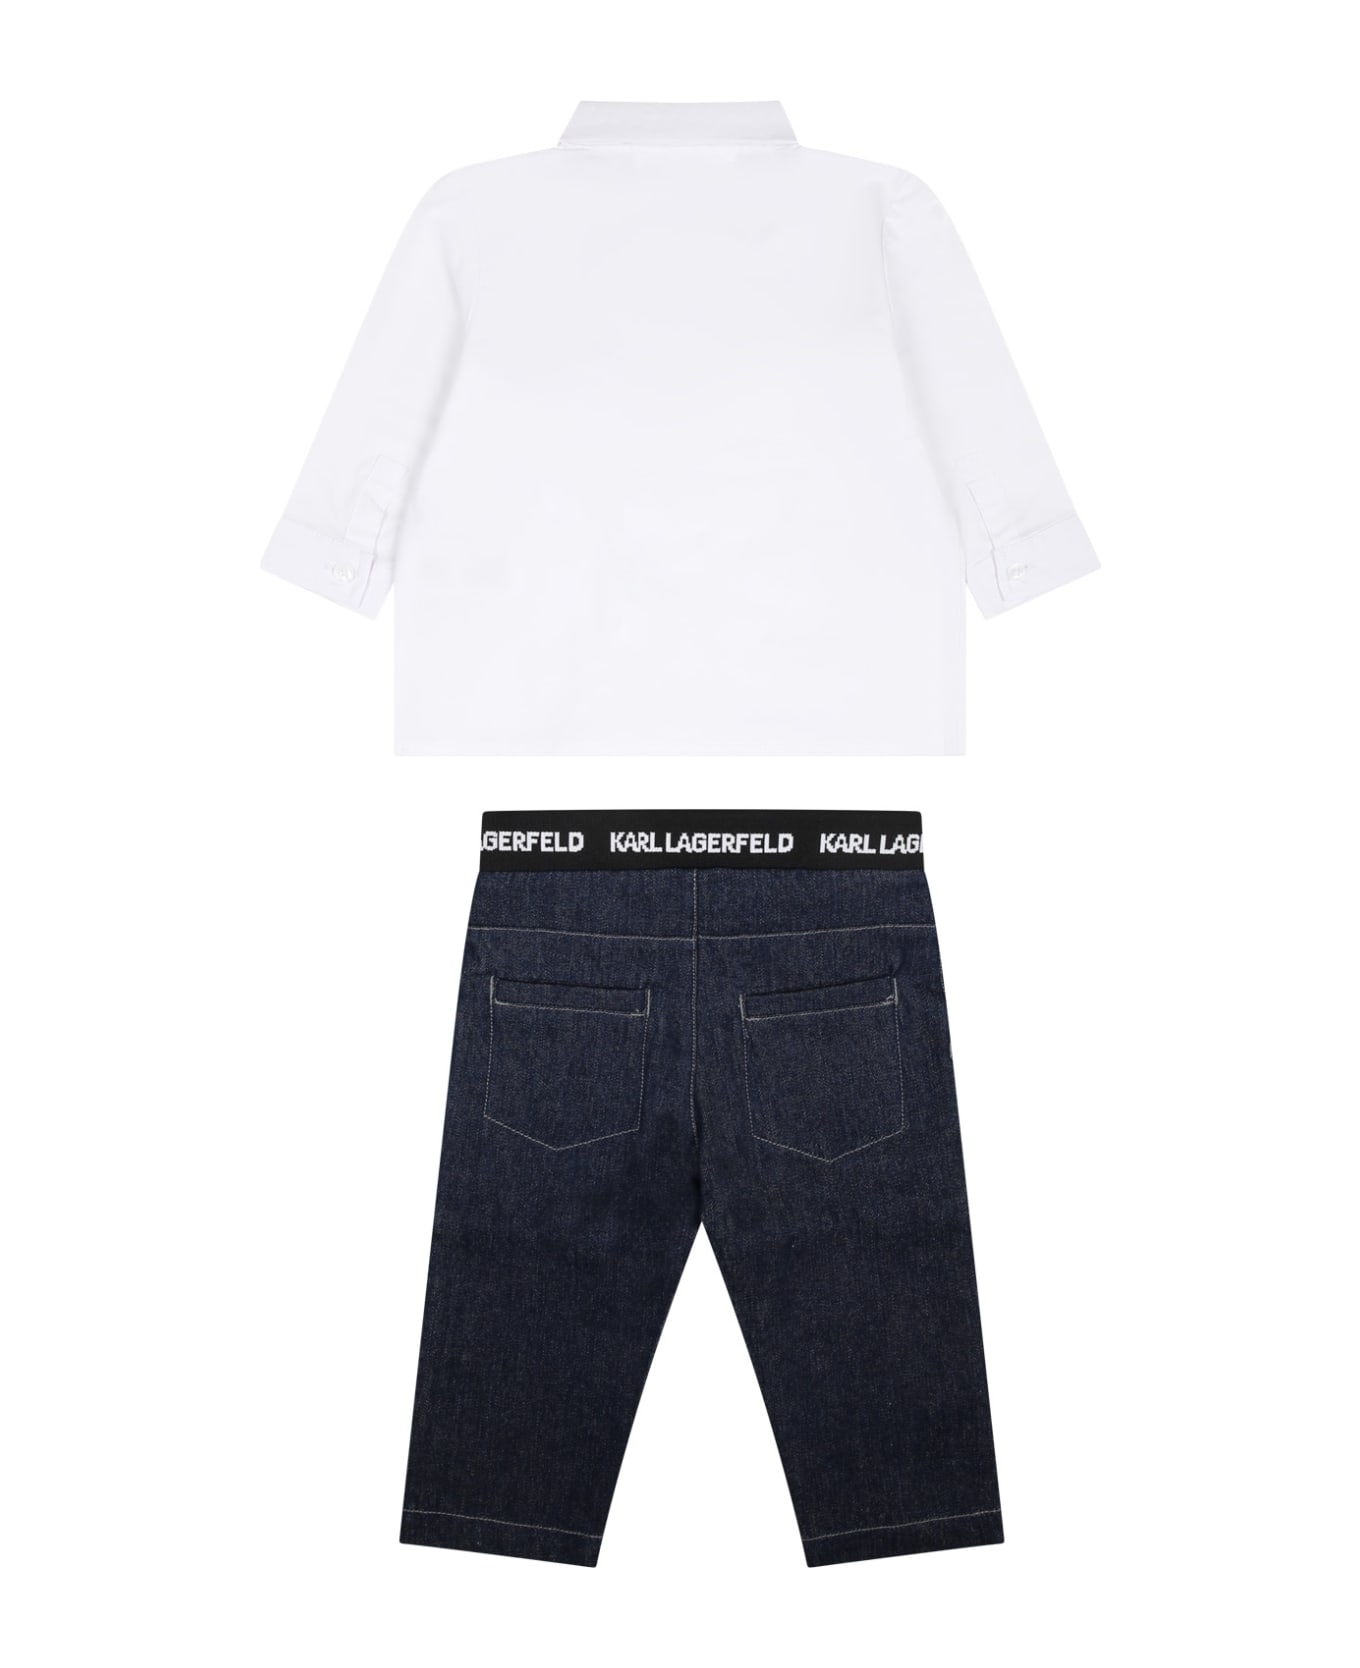 Karl Lagerfeld Kids Multicolor Set For Baby Boy - Multicolor ボトムス